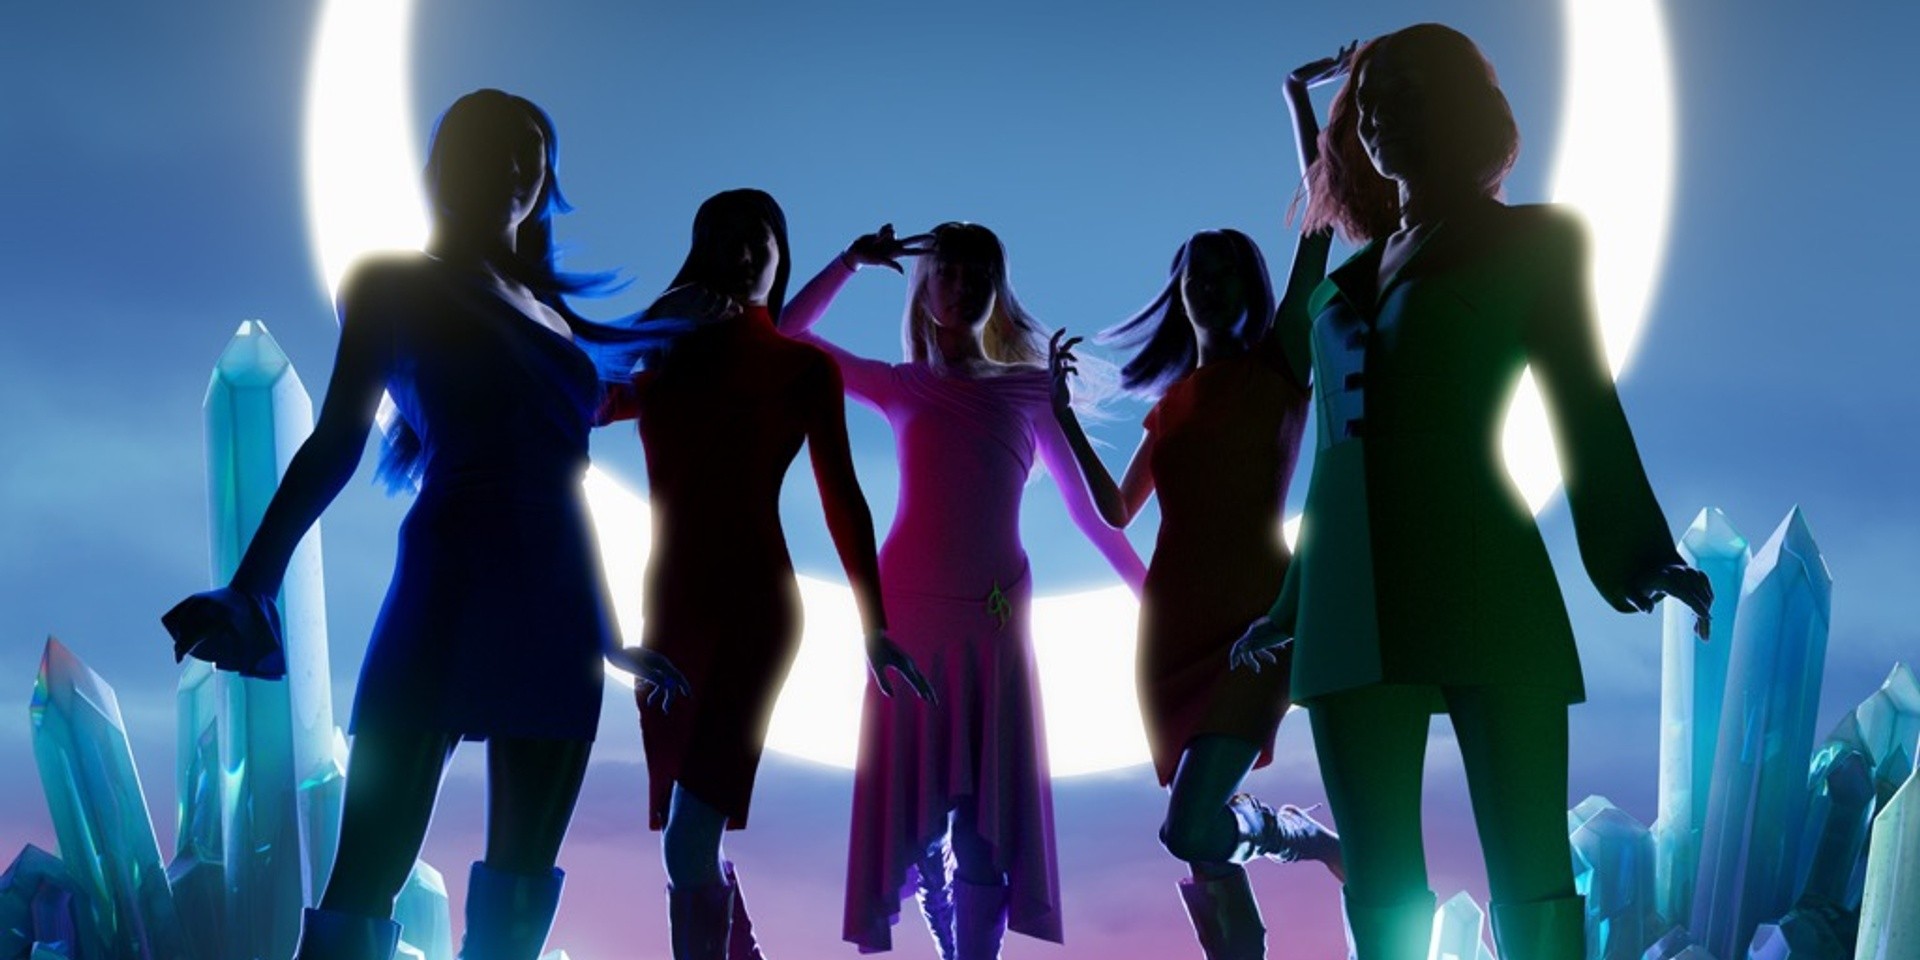 Sailor Moon-inspired girl group SG5 to debut this July